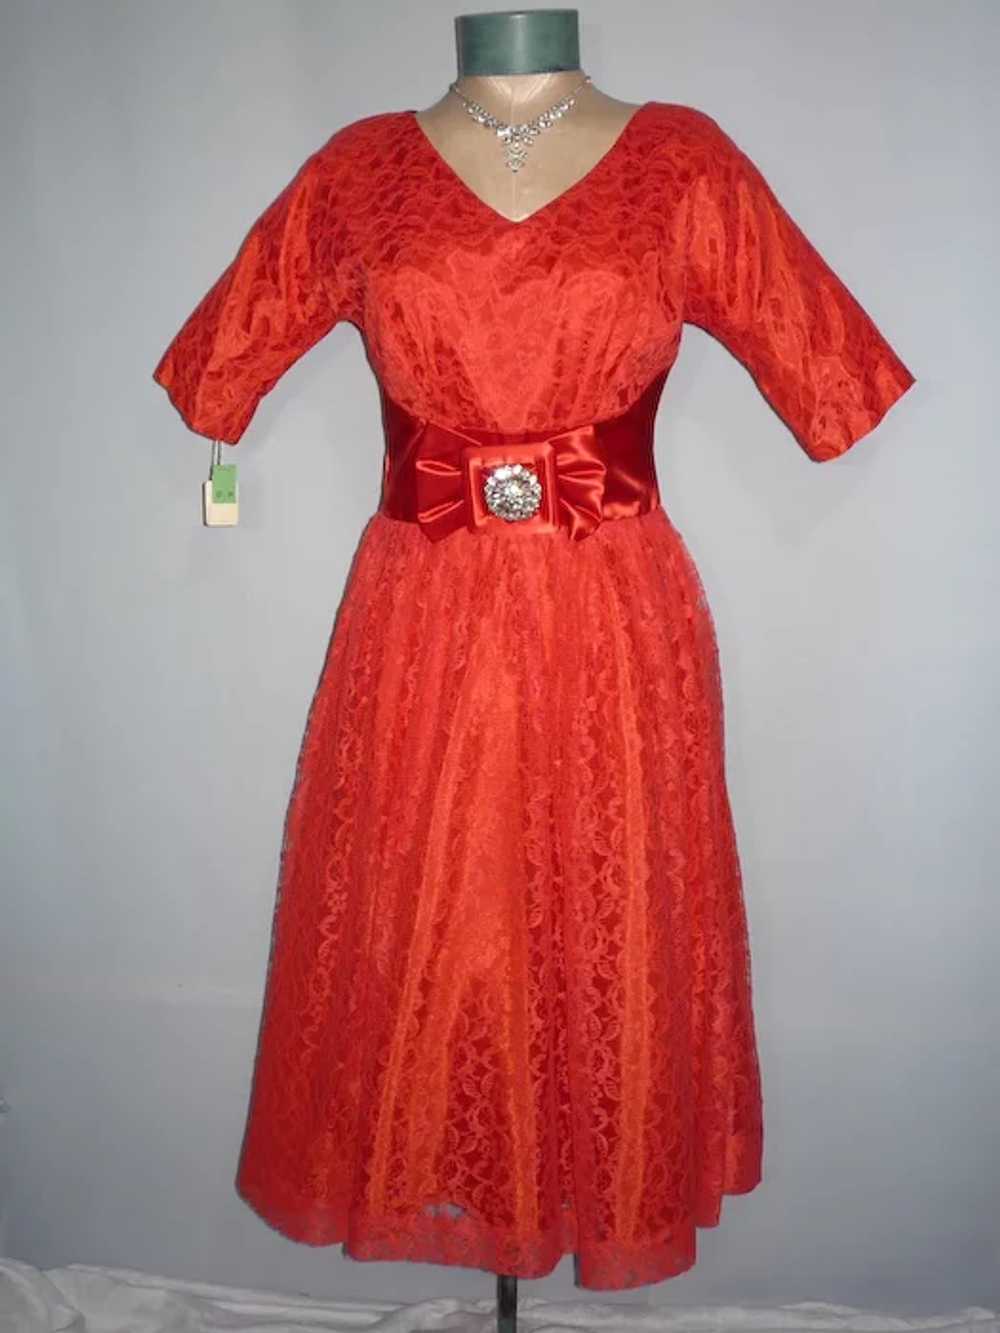 Vintage 1950s Red Chantilly Lace Party Dress - image 1